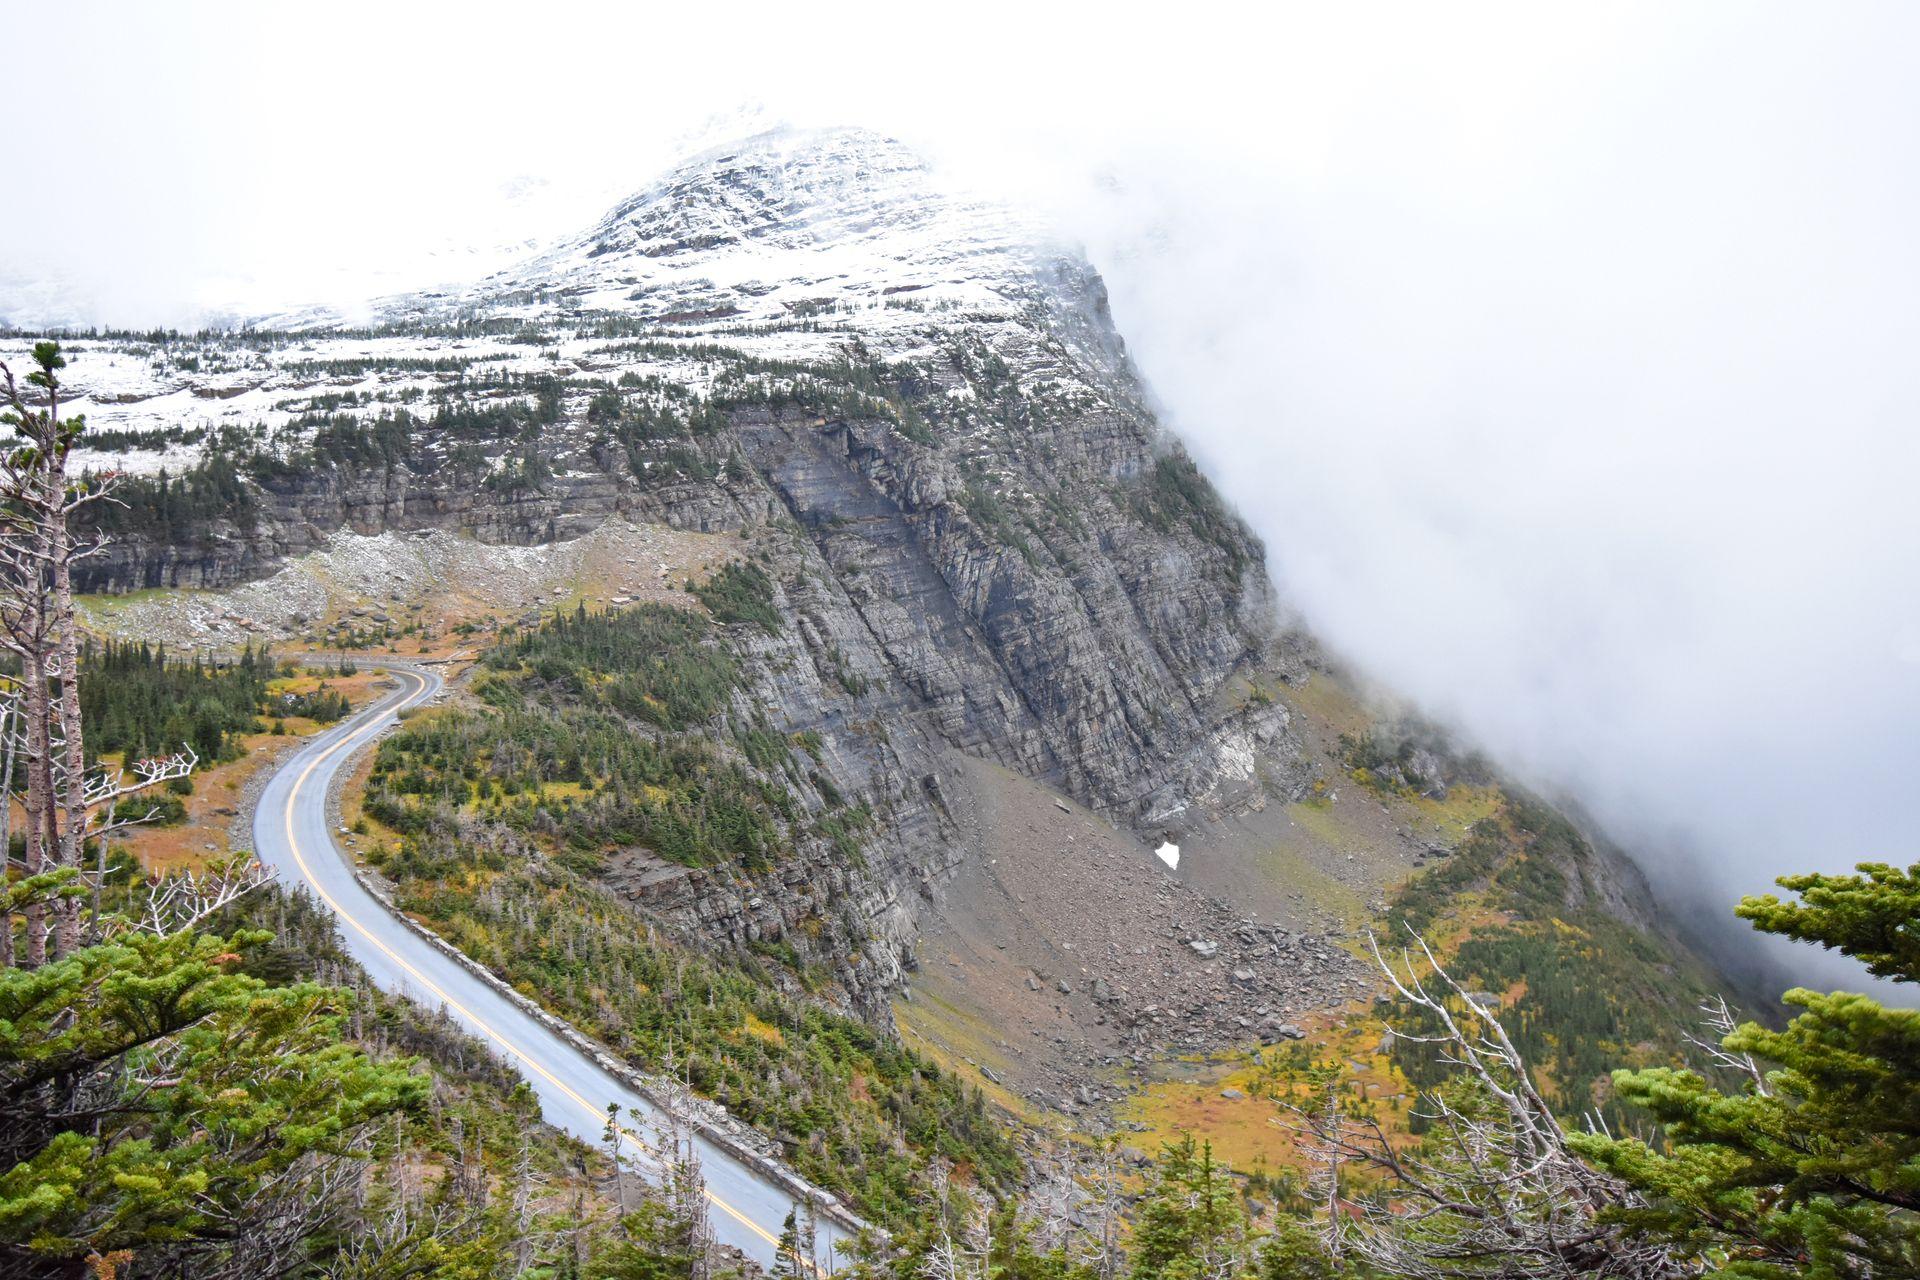 The Going to the Sun Road curving down a the side of the mountain. There is fog and snow on top of the mountain.